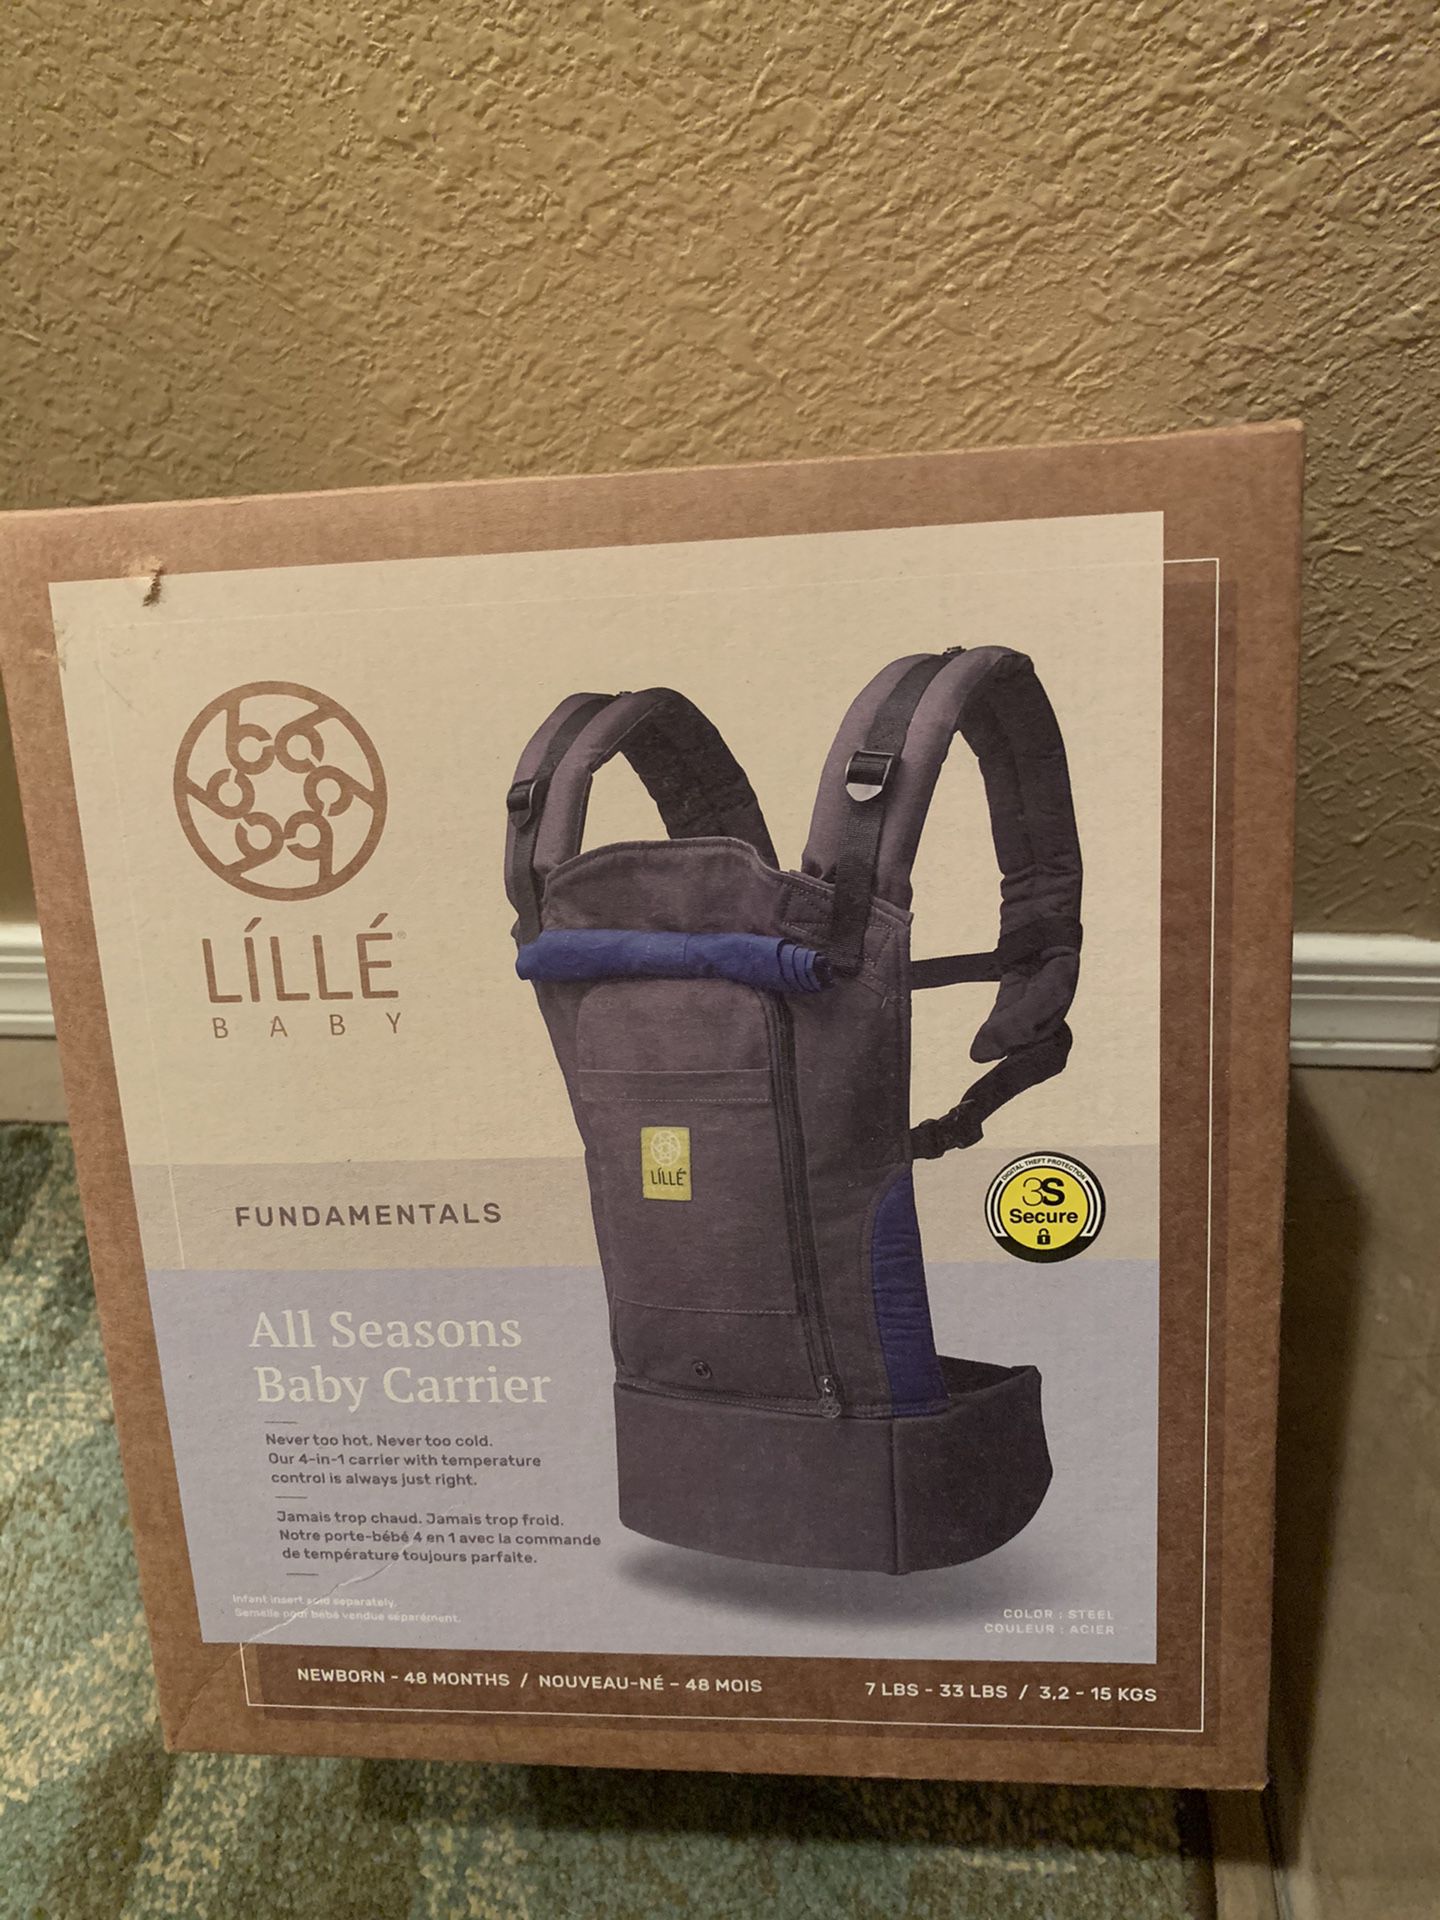 Lille 👶🏻 Baby Fundamentals All Seasons Baby Carrier - Newborn to 48 months - 7 to 33 lbs